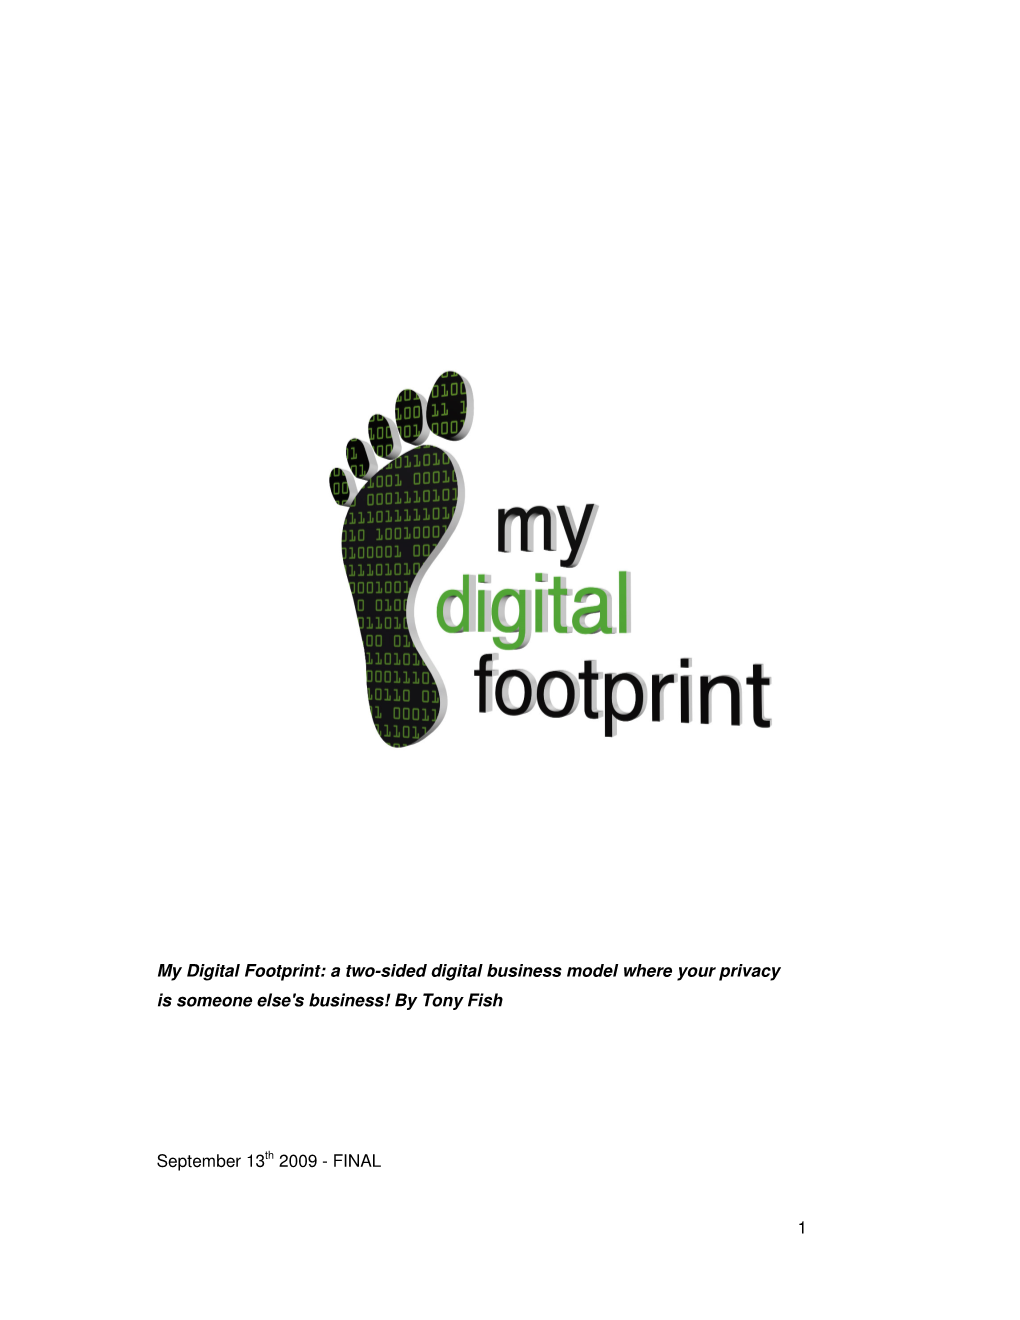 Digital Footprint: a Two-Sided Digital Business Model Where Your Privacy Is Someone Else's Business! by Tony Fish